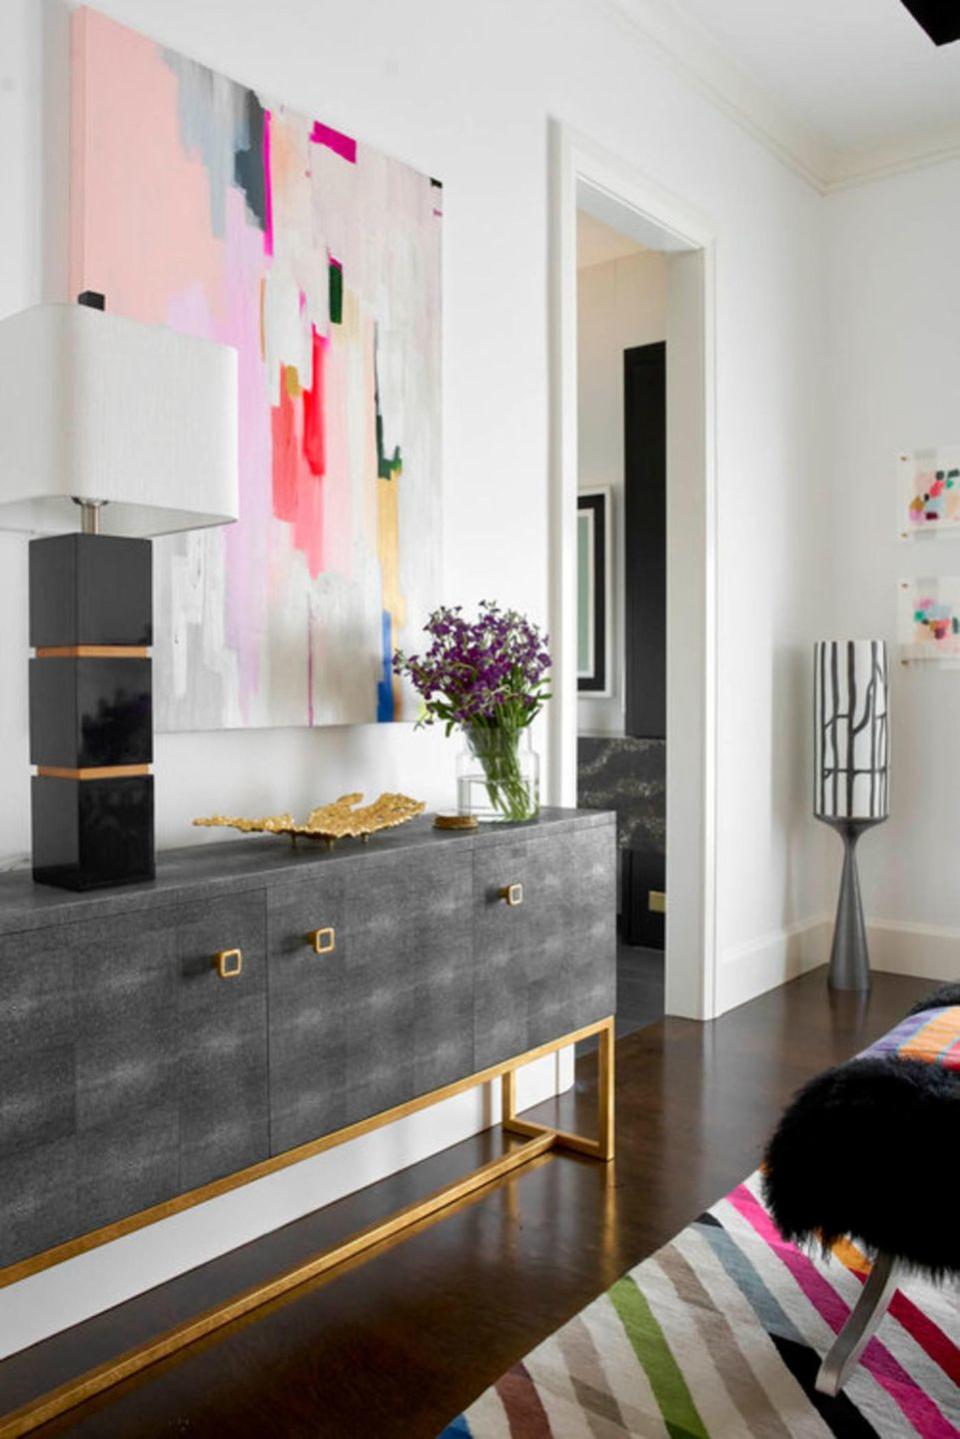 25 Ways to Instantly Change a Room with a Vibrant Pop of Color